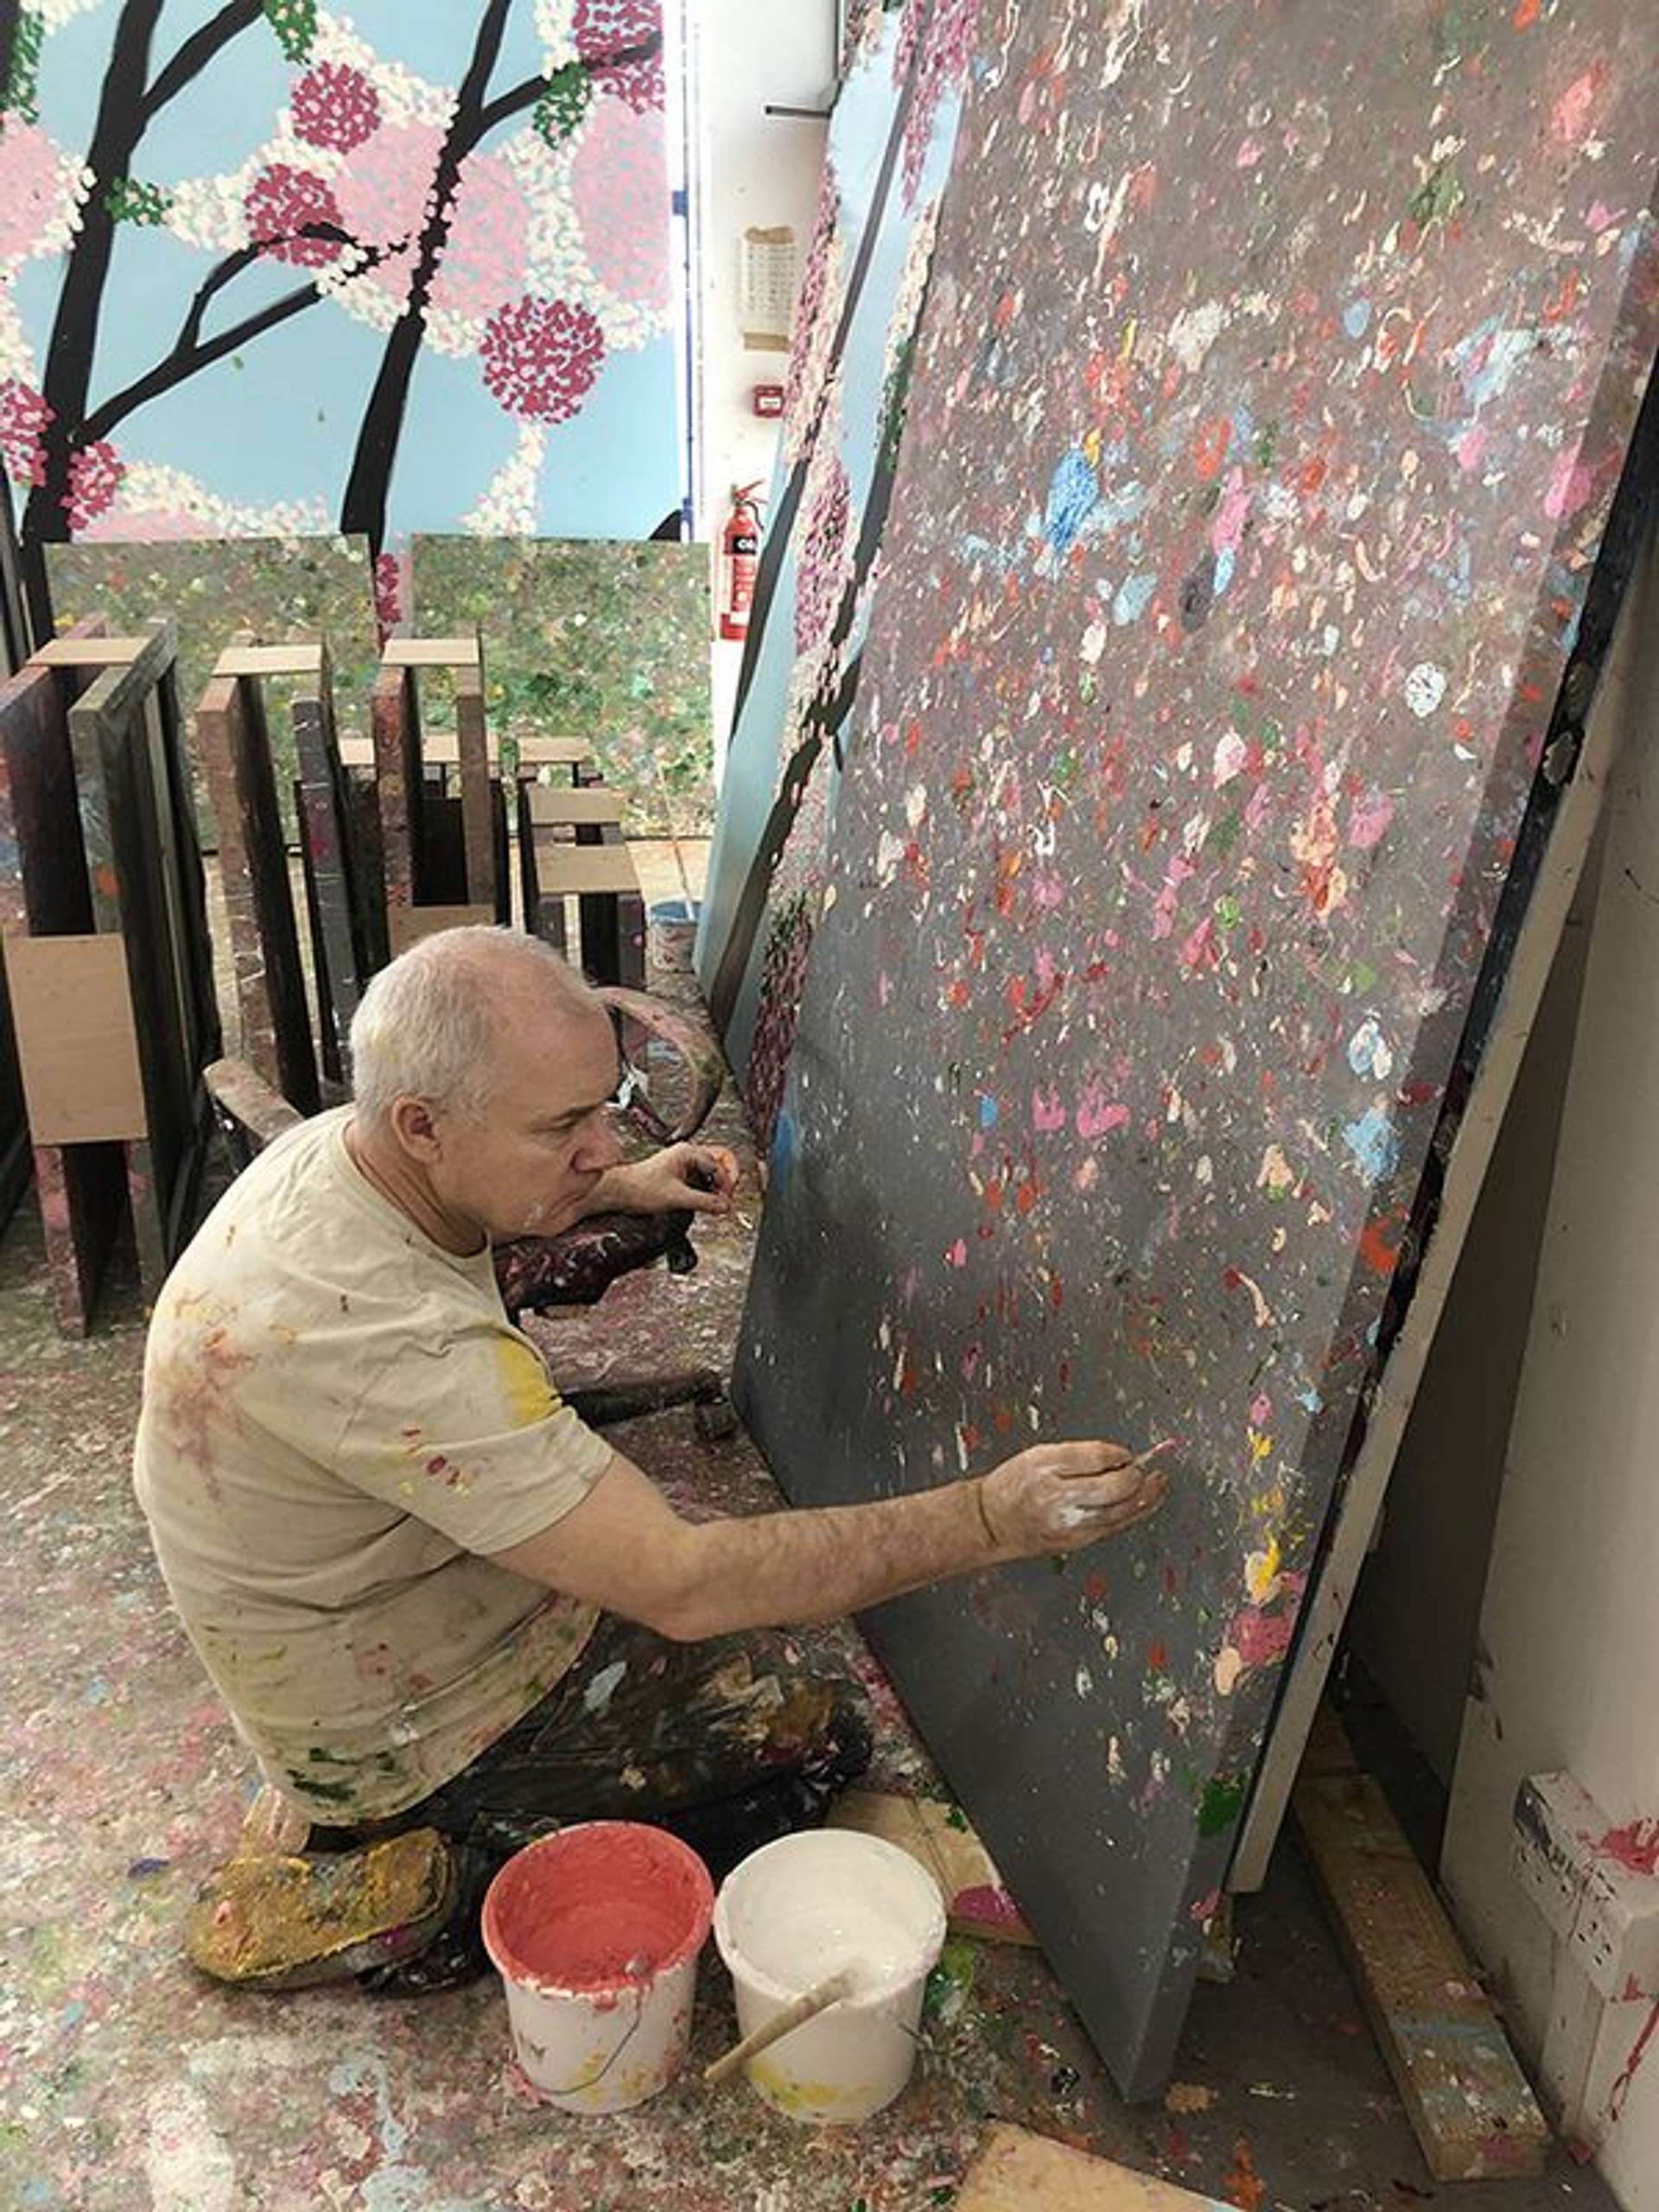 A photograph of the artist Damien Hirst at work in one of his paintings for Where The Land Meets The Sea. He is shown kneeling on the floor, surrounded and splattered by paint, adding splashes to a canvas with his right hand.